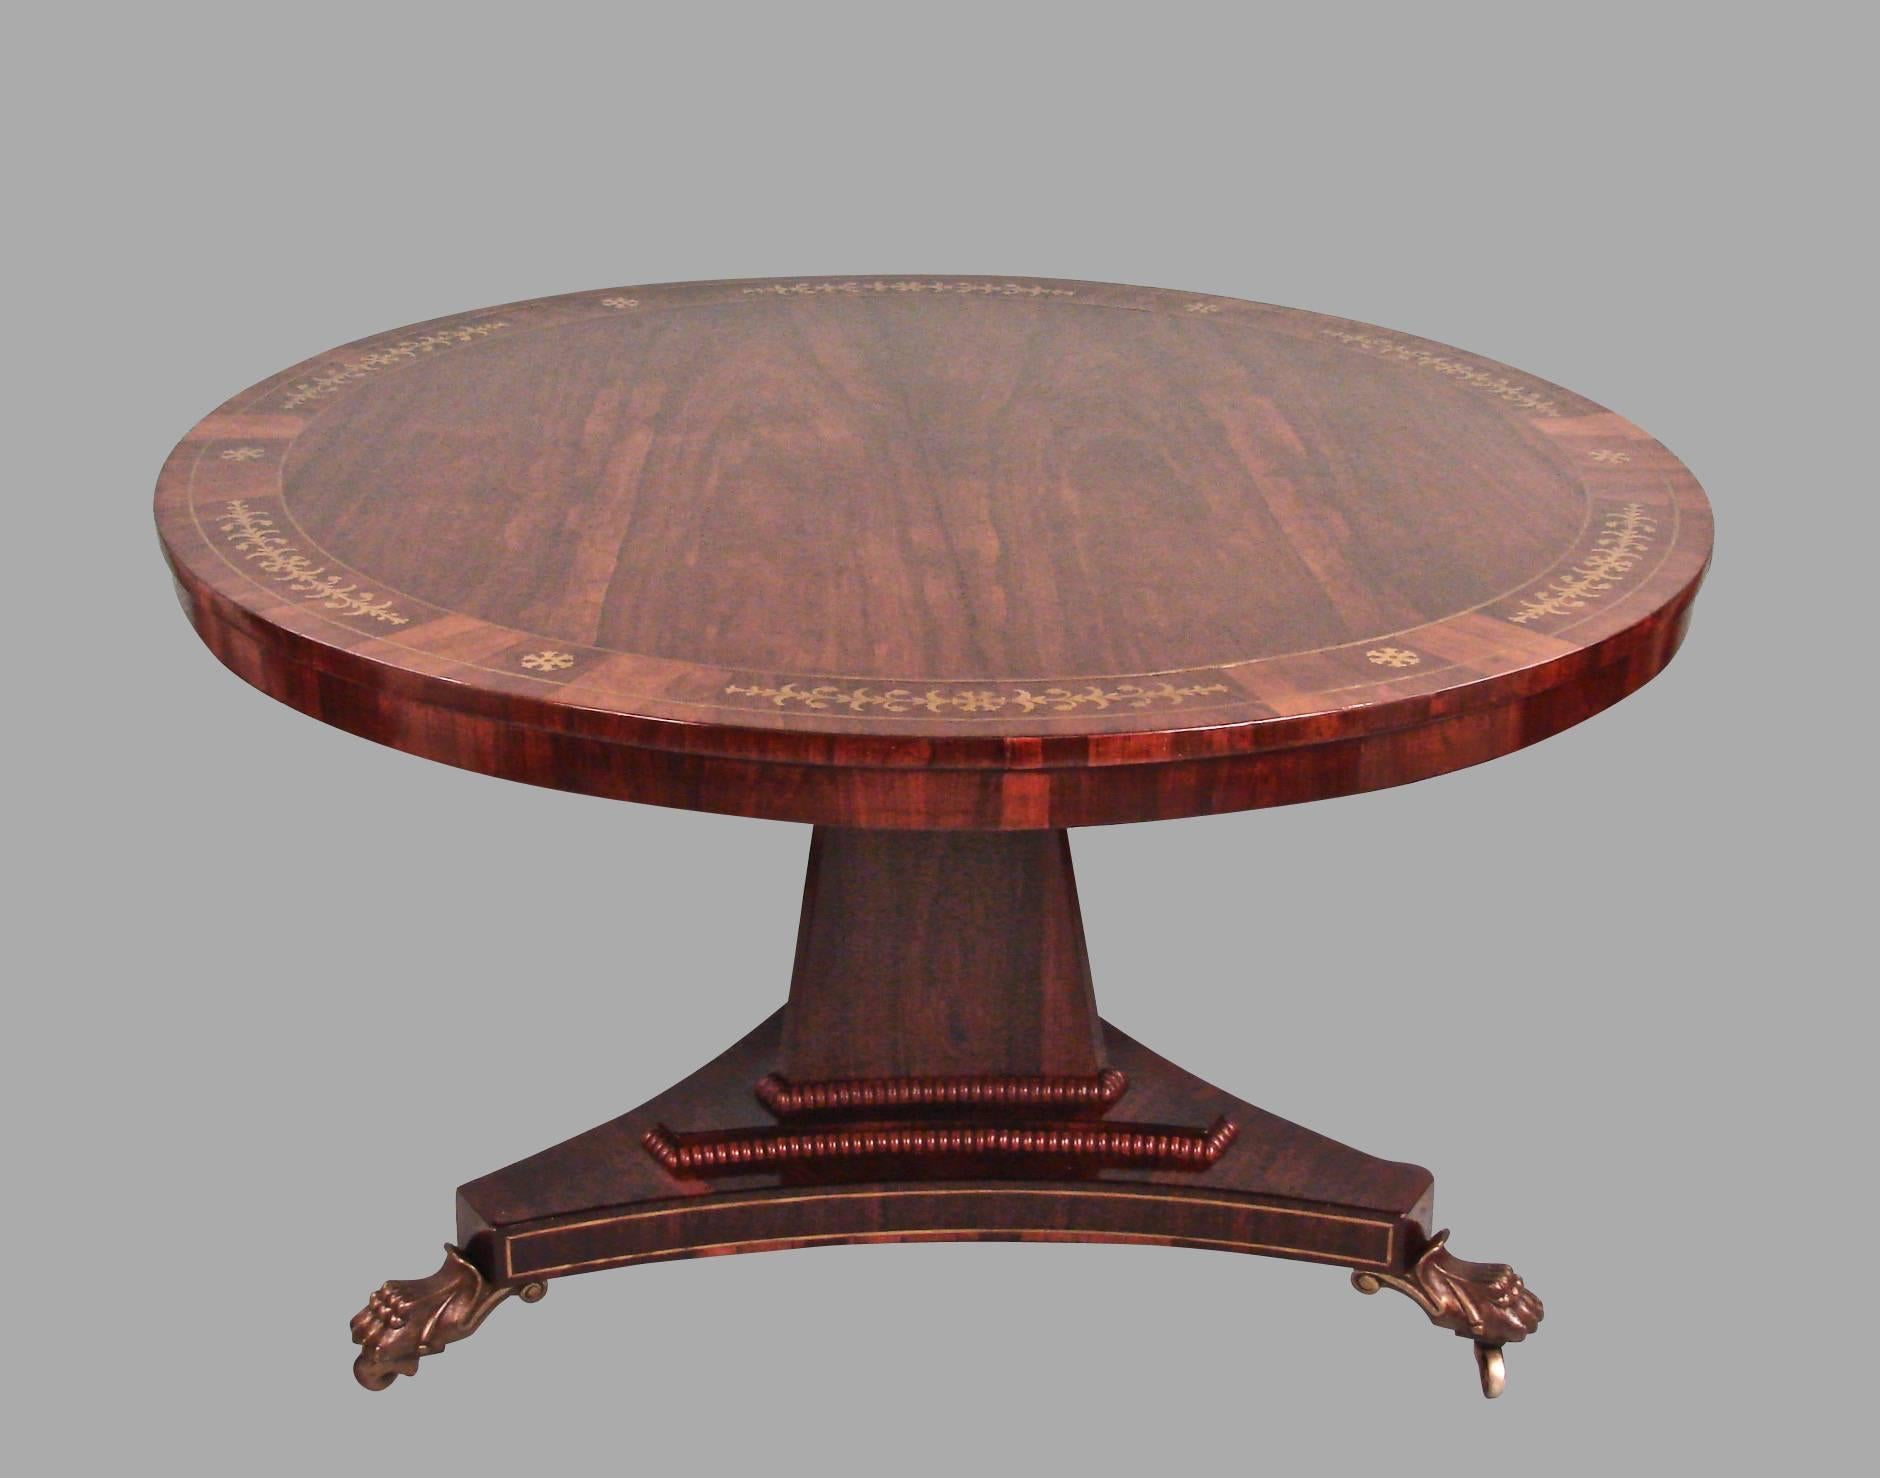 English Regency Brass-Inlaid Center Table with Triangular Base and Animal Paw Feet